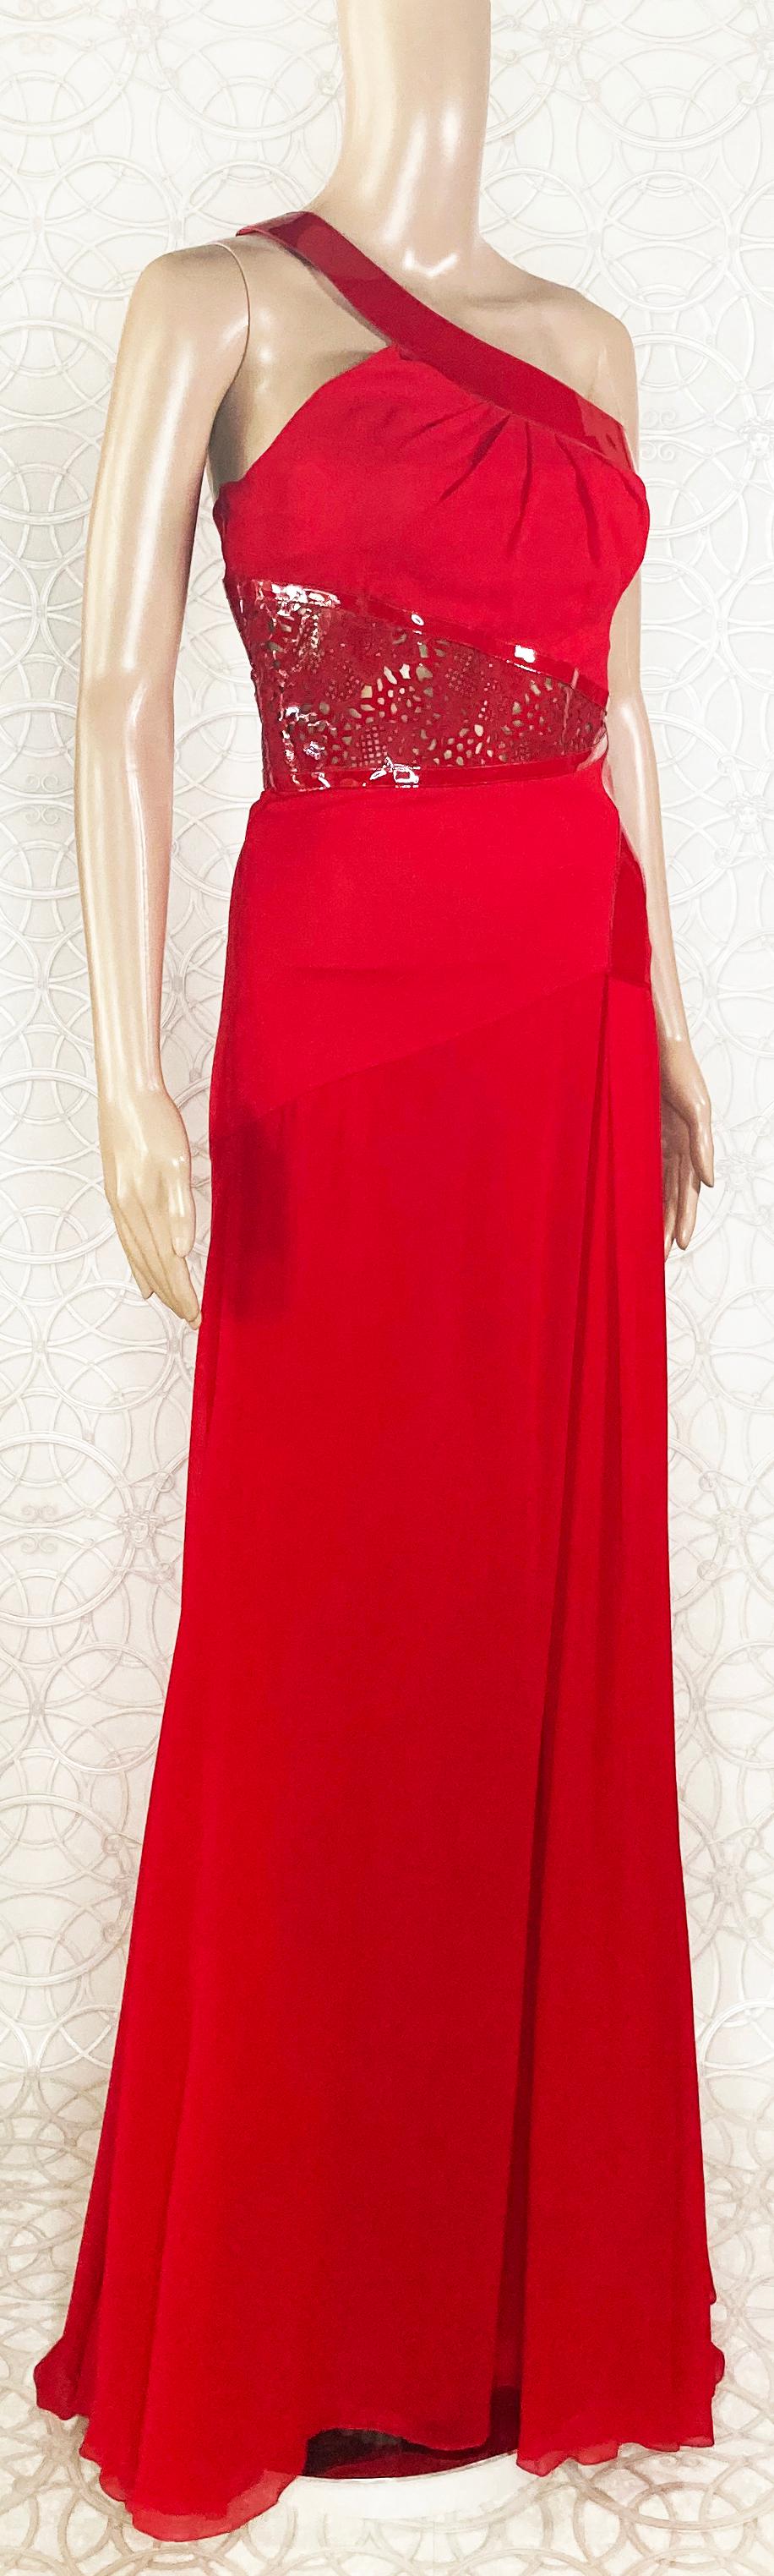 VERSACE RED SILK EVENING LONG GOWN DRESS w/PATENT LEATHER INSERTS 38 -2 For Sale 8